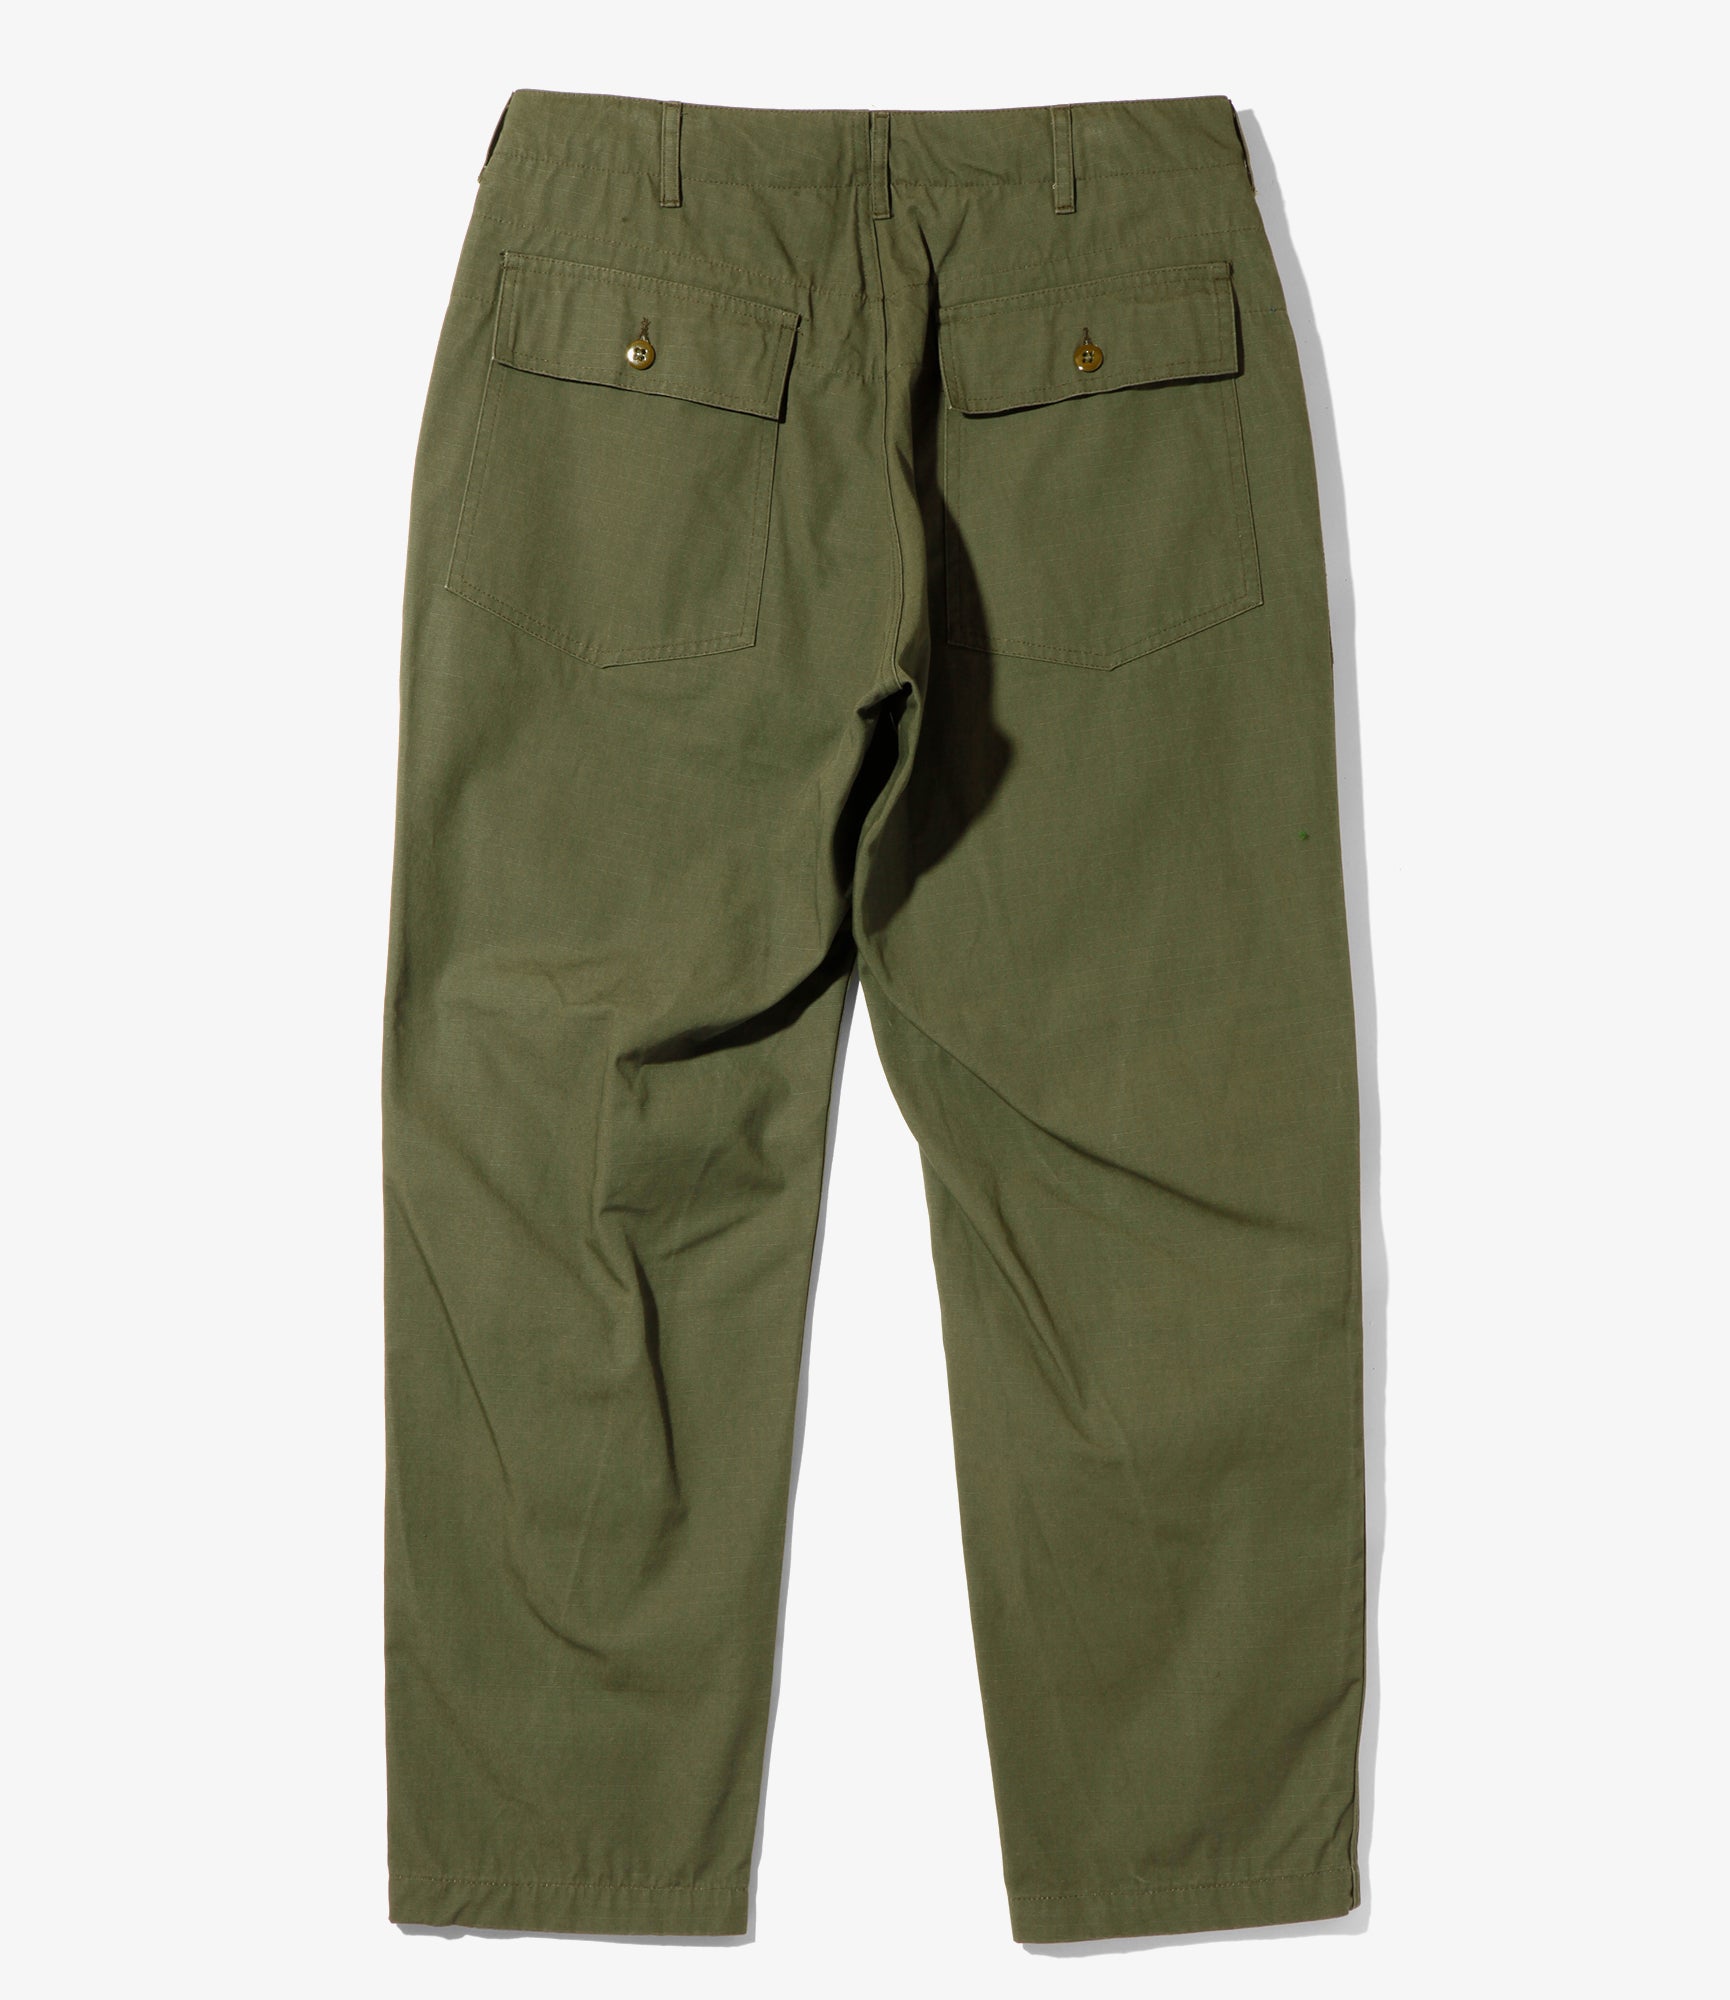 Engineered Garments Fatigue Pant - Olive Heavyweight Cotton Ripstop